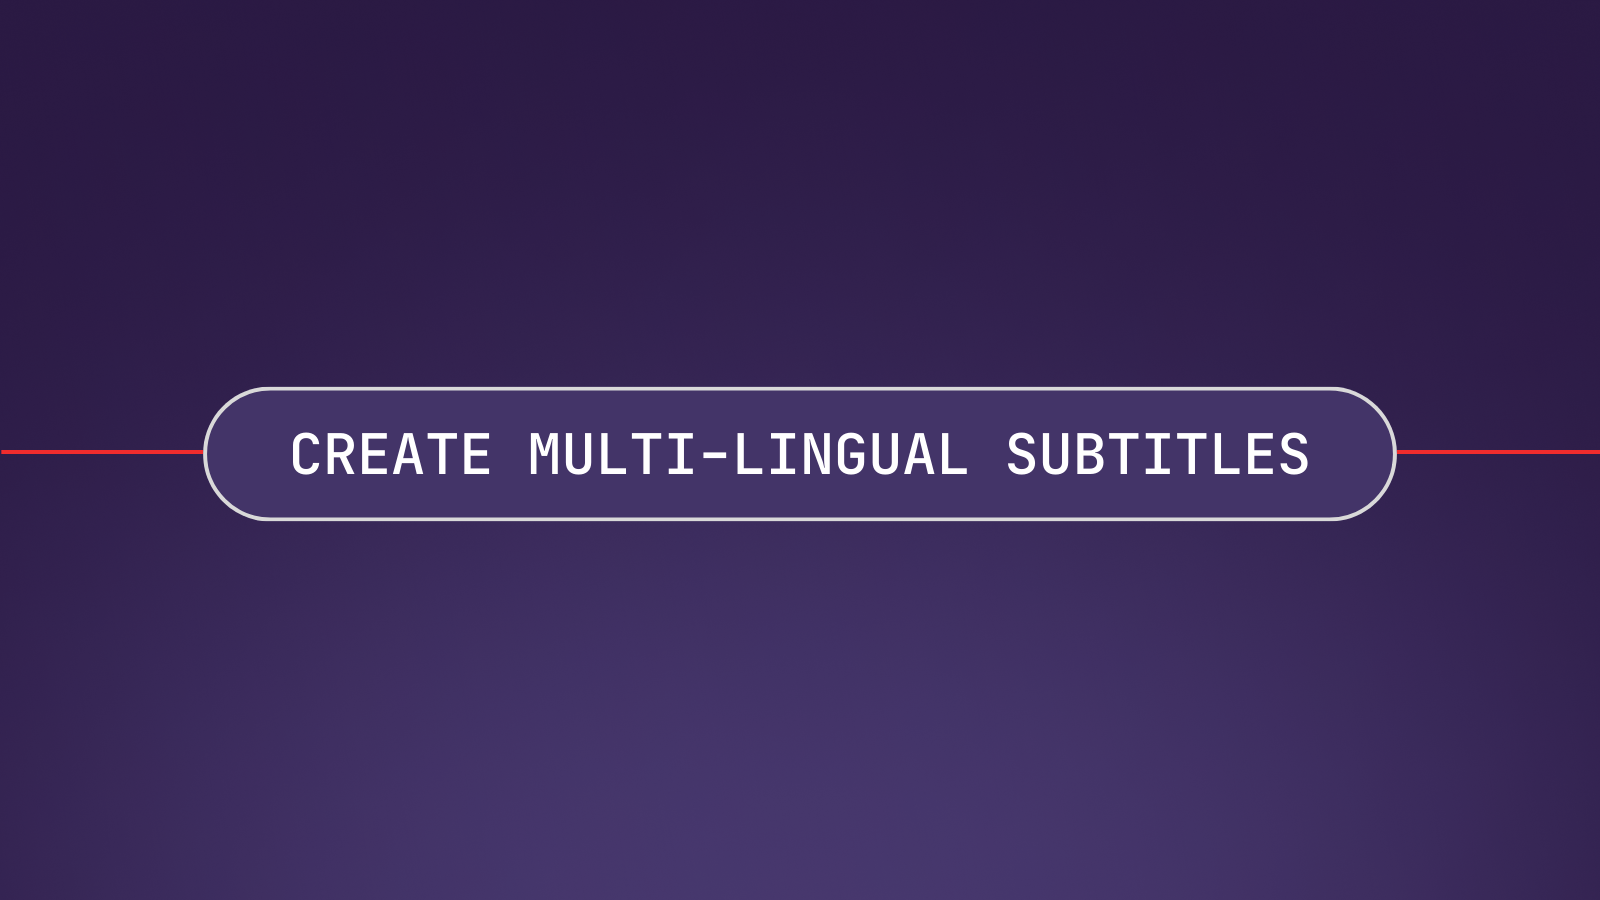 Create Multi-Lingual Subtitles with AssemblyAI and DeepL